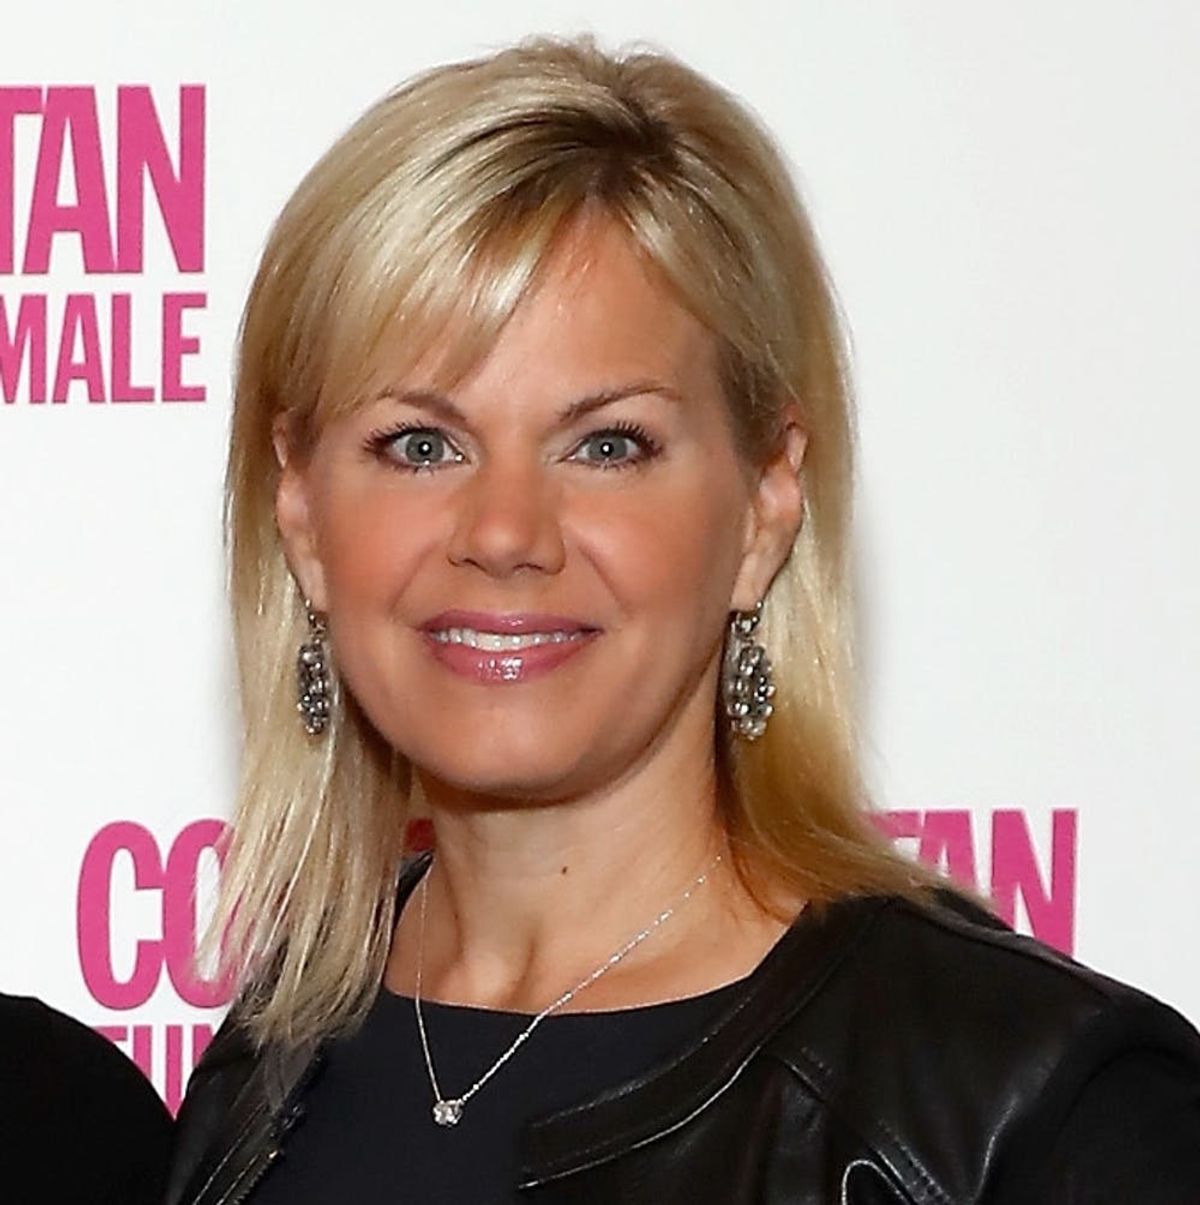 Fox News Alum Gretchen Carlson Is on Board With a Bipartisan Bill to Protect Women from Harassment at Work